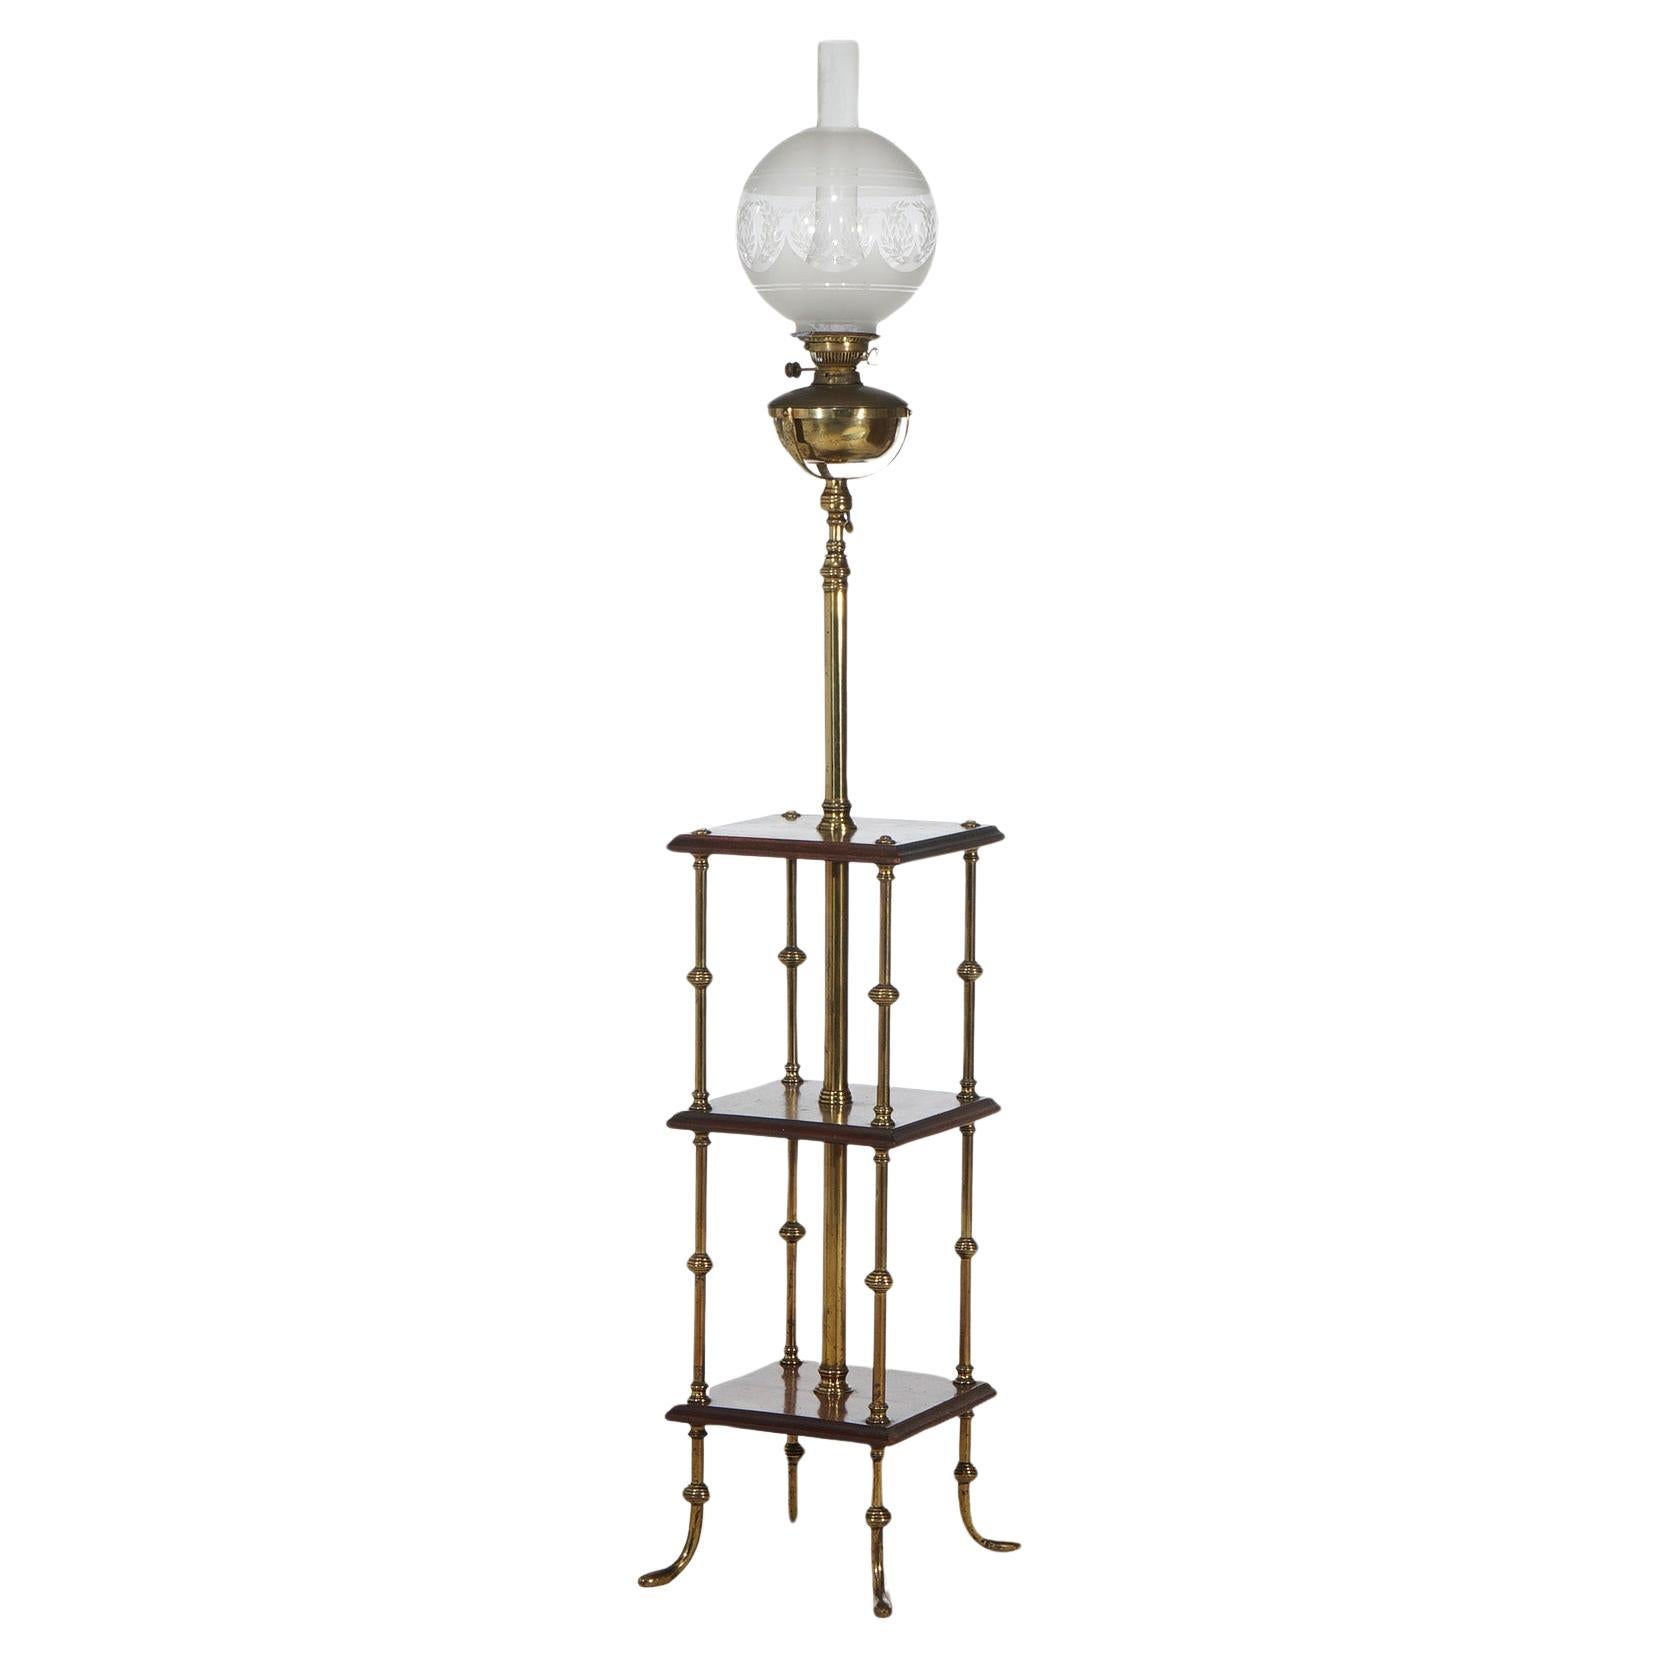 Antique Neoclassical Mahogany & Brass Piano Floor Lamp c1890 For Sale